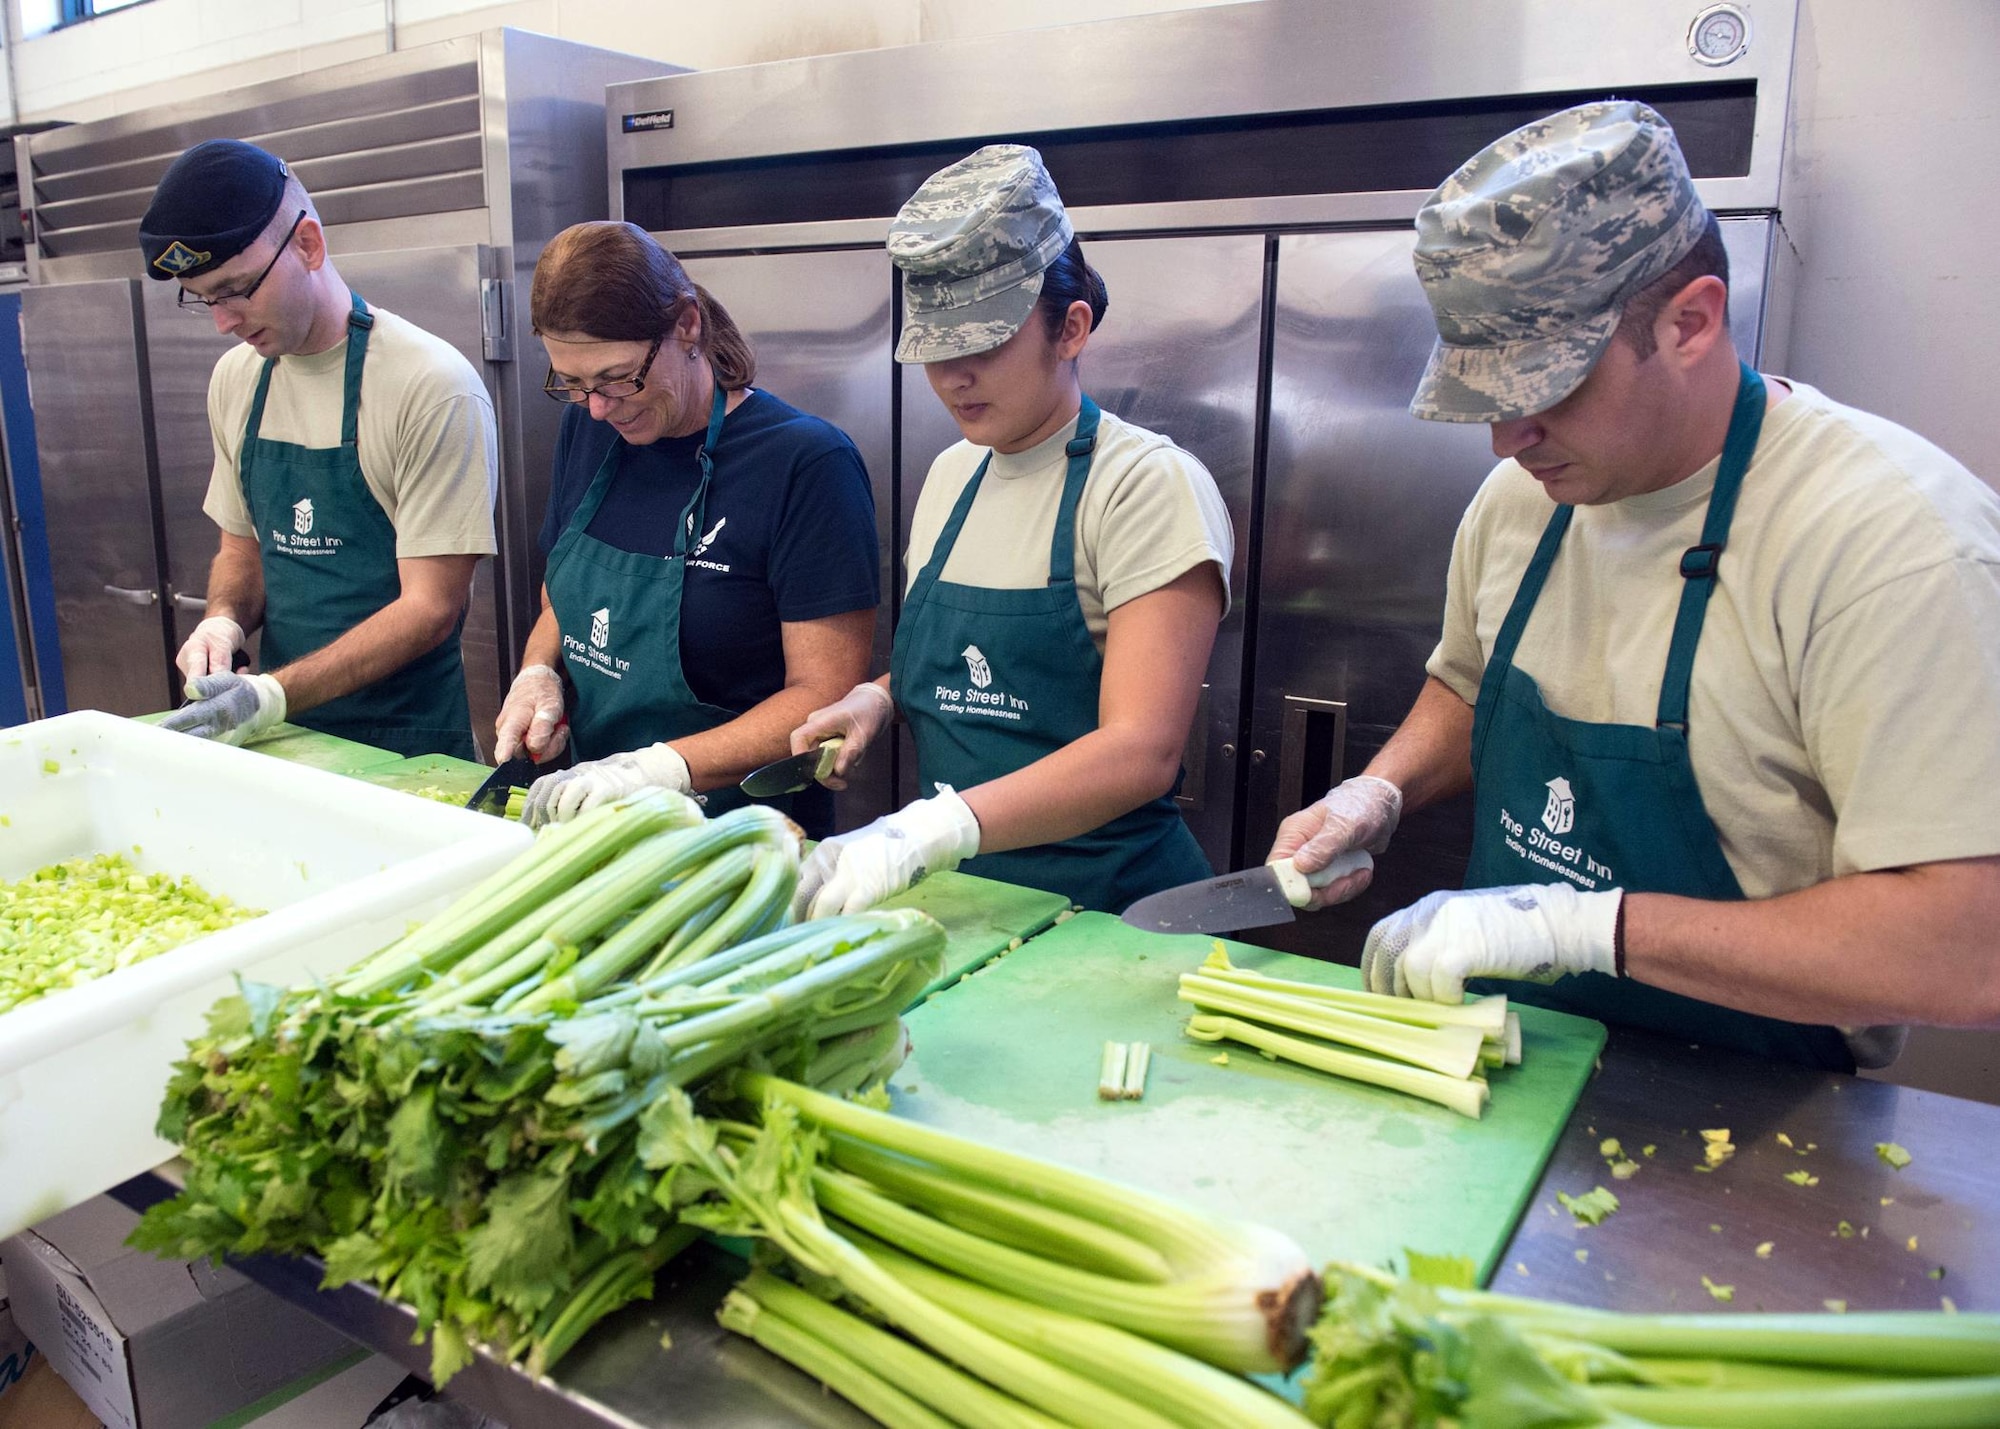 Airmen cut vegetables at the Pine Street Inn while volunteering to prepare meals for more than 1,600 homeless men and women at three Boston area shelters. Pictured from left to right are Staff Sgt. Jamie Ash, a 319th Recruiting Squadron recruiter; Patricia O’Connor, a 319th Recruiting Squadron recruiting flight office administrator; Airman 1st Class Michele Anderson, a 66th Comptroller Squadron Commander's Support Staff administration specialist; and Master Sgt. Nicholas Souza, a 66th Air Base Group first sergeant, who organized the event. (U.S. Air Force photo/Jerry Saslav)